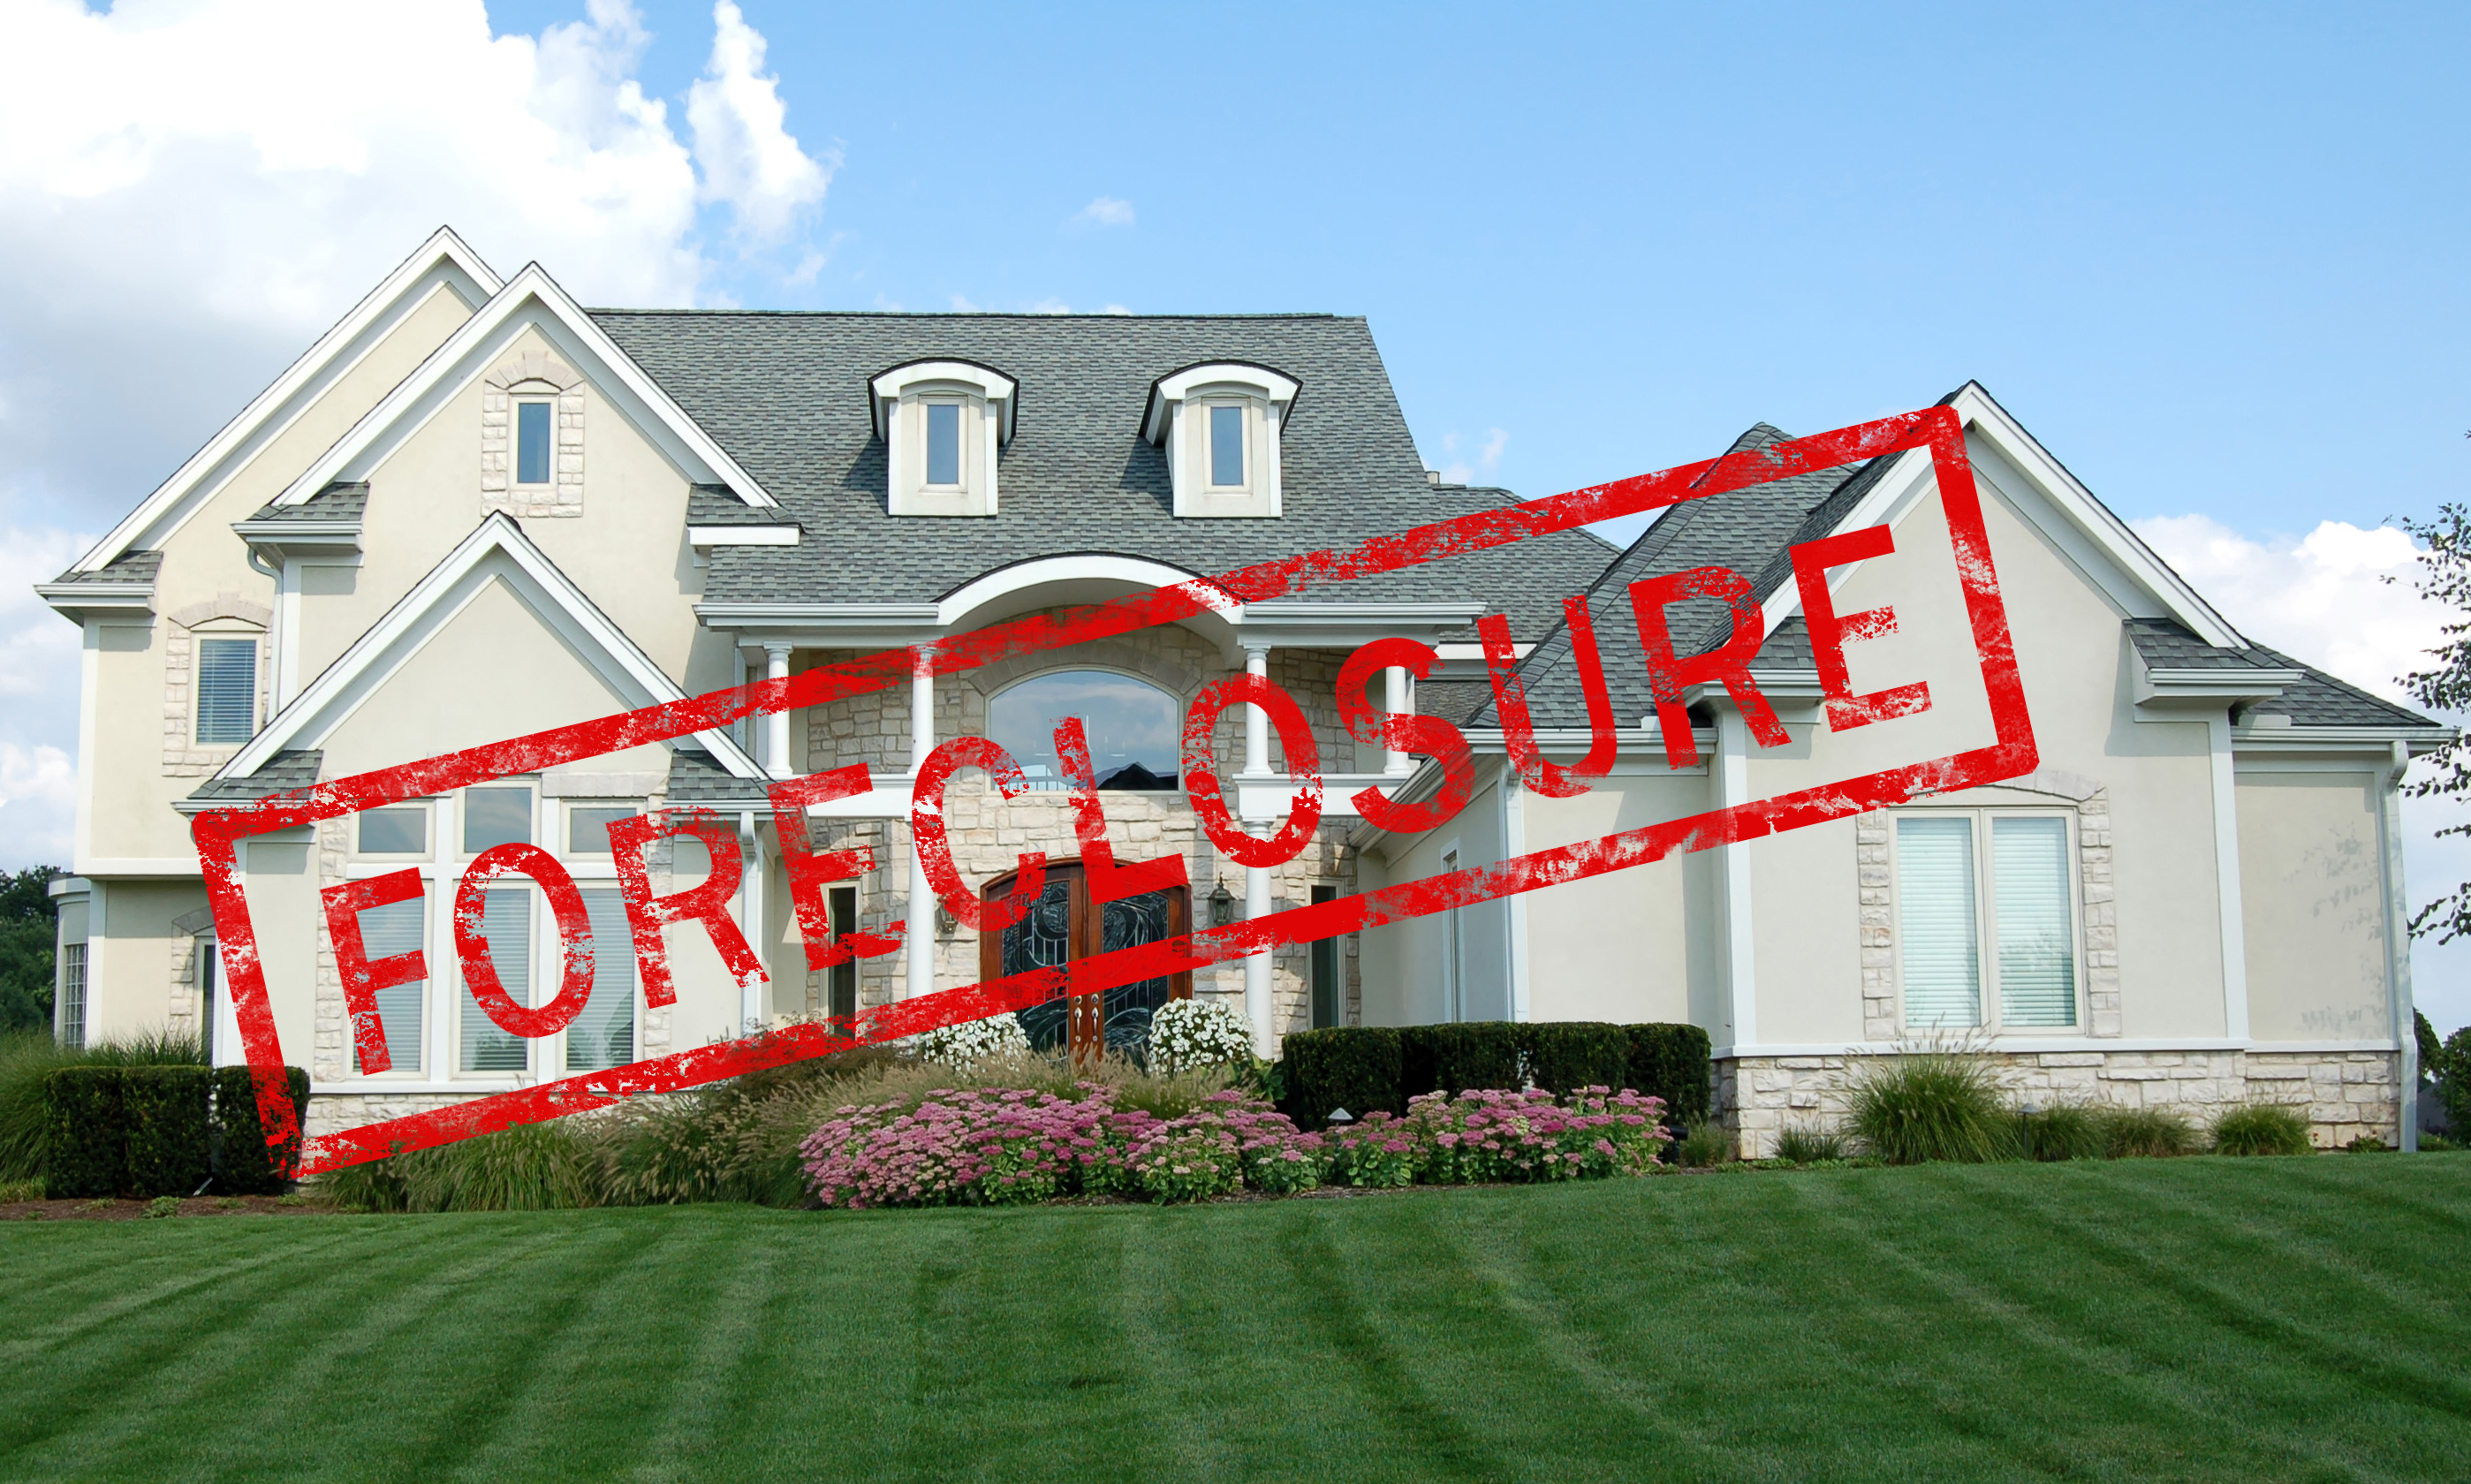 Call ASAP Appraisal Group to discuss appraisals of Polk foreclosures